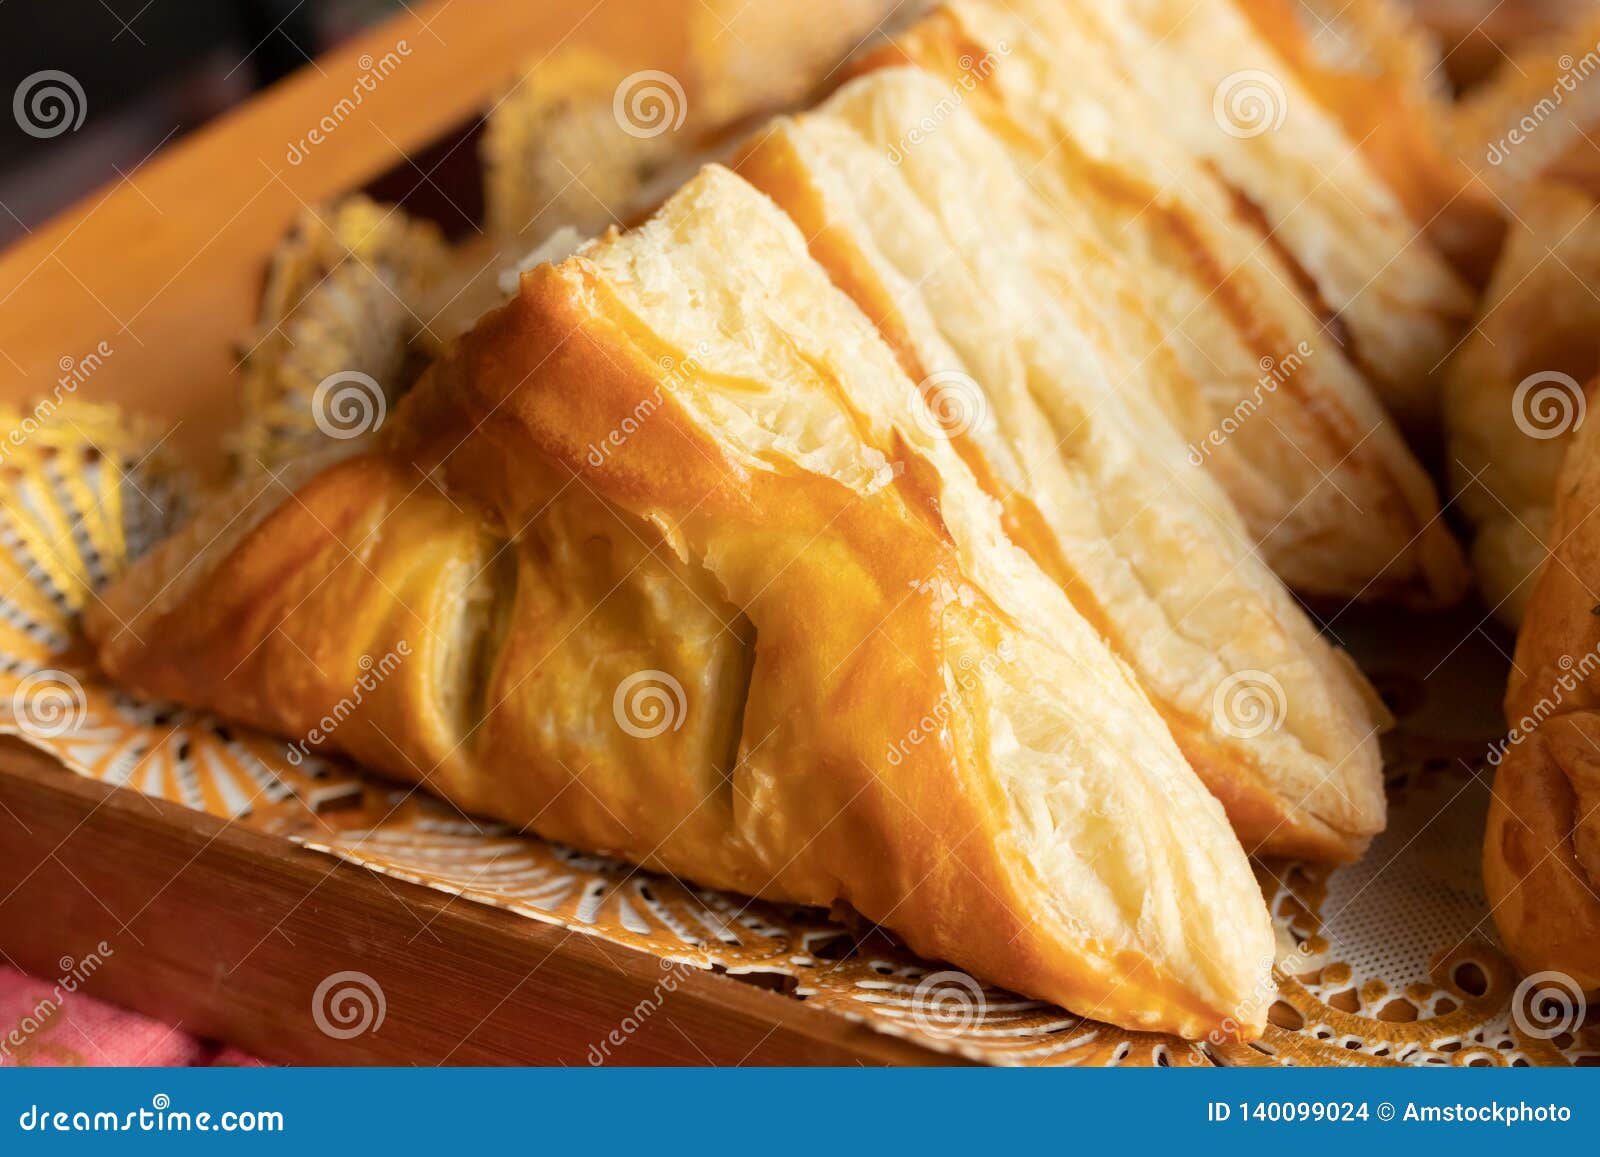 Close up of chicken puffs stock photo. Image of meal - 140099024